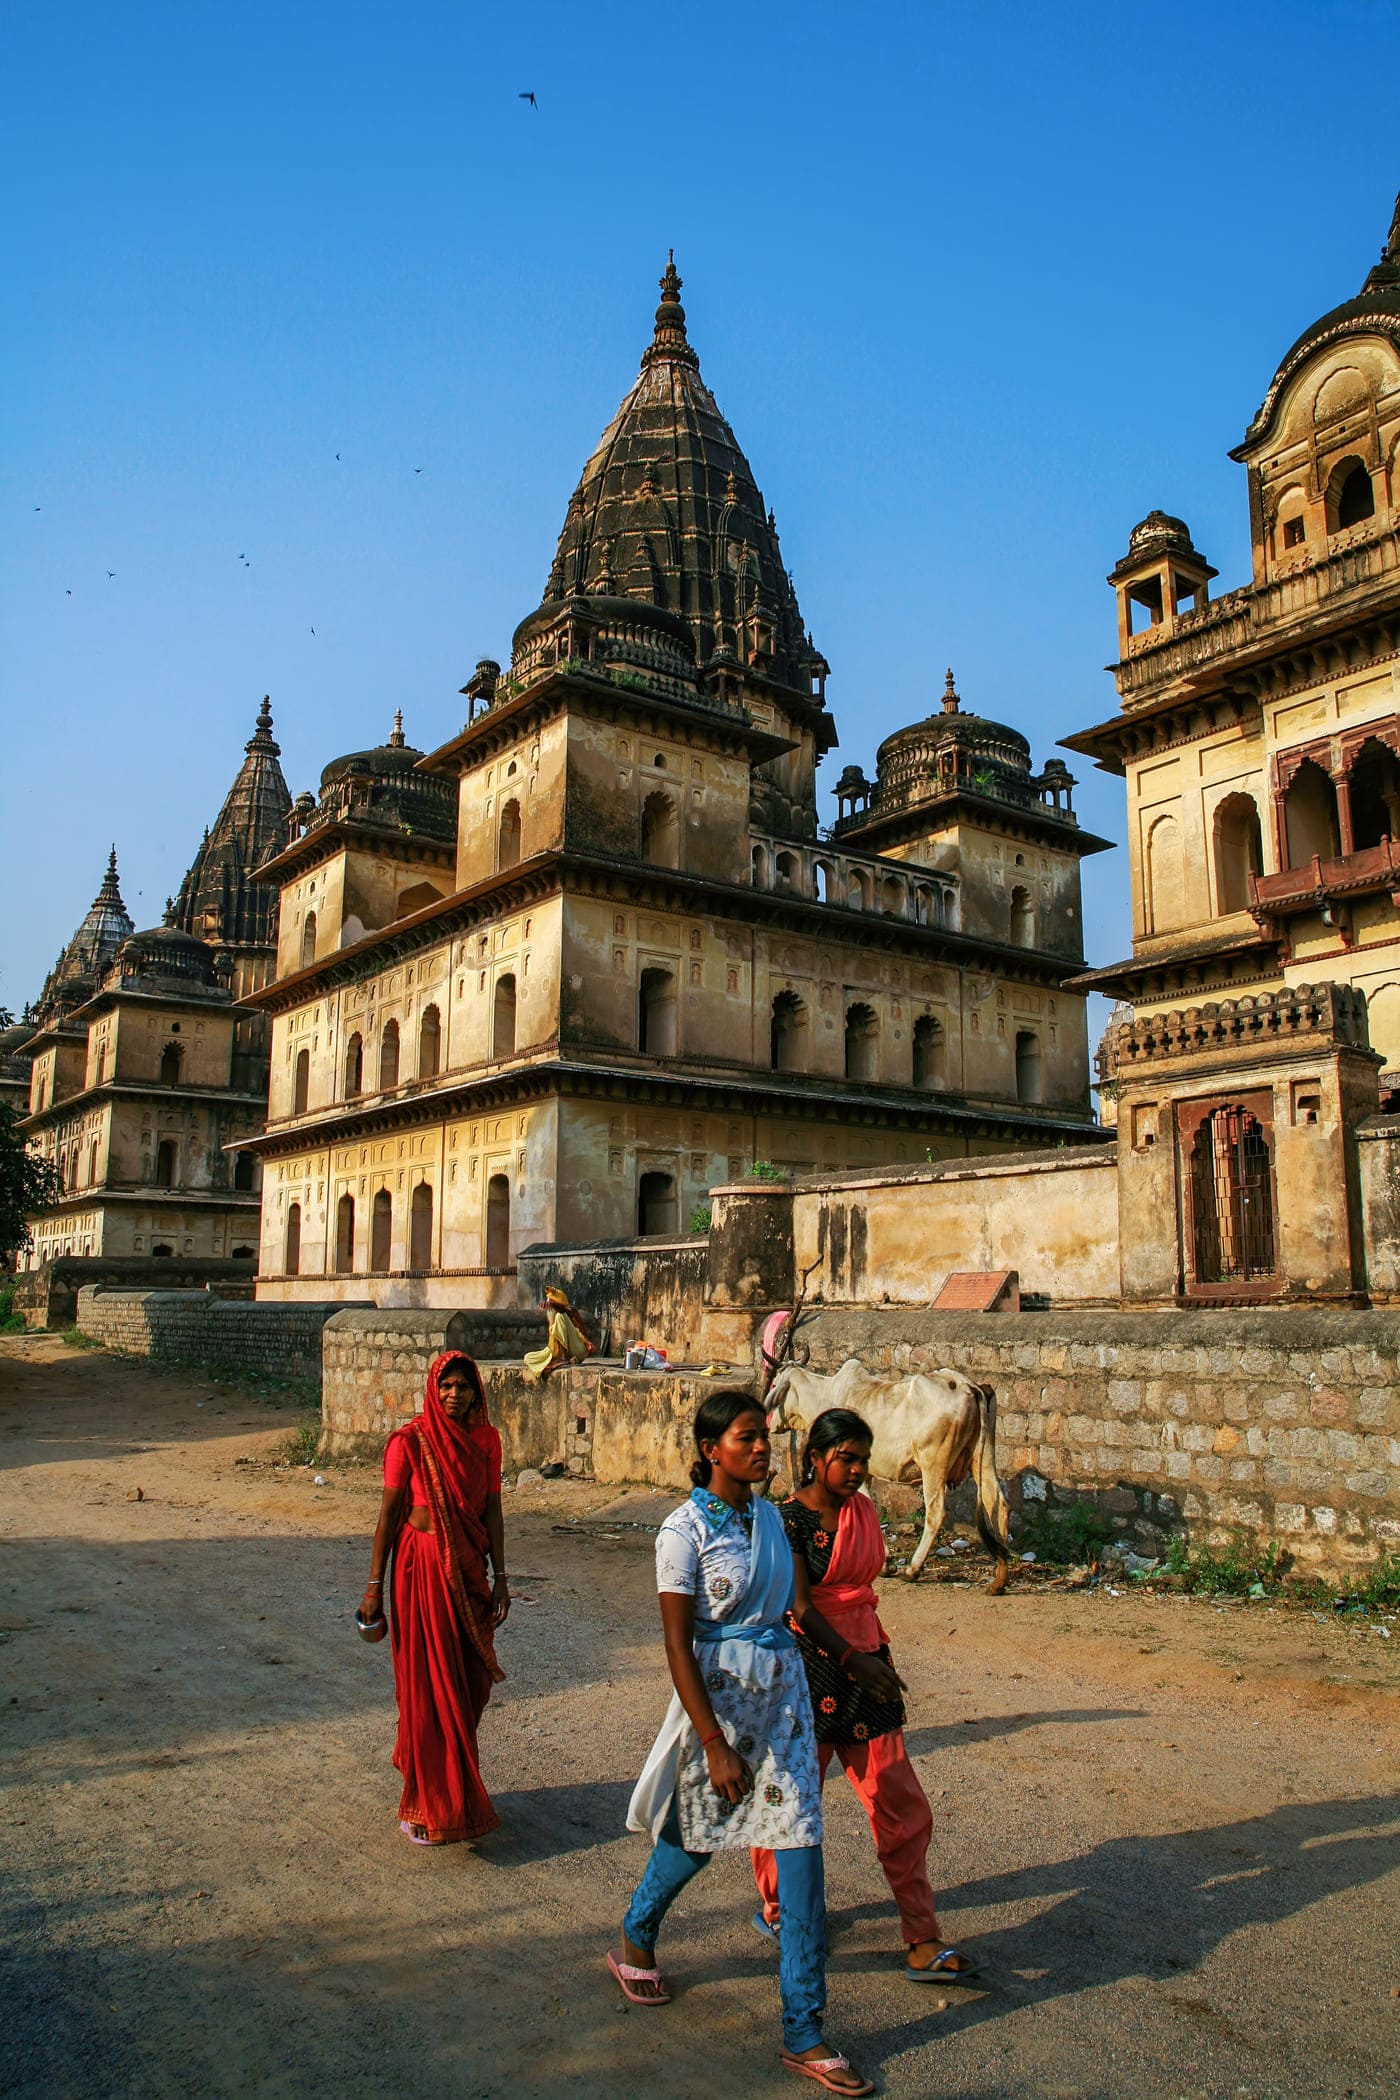 Women in the native rural surroundings of Madhya Pradesh’s Orchha walk by the temples and royal cenotaphs, unfazed by their historical enigma